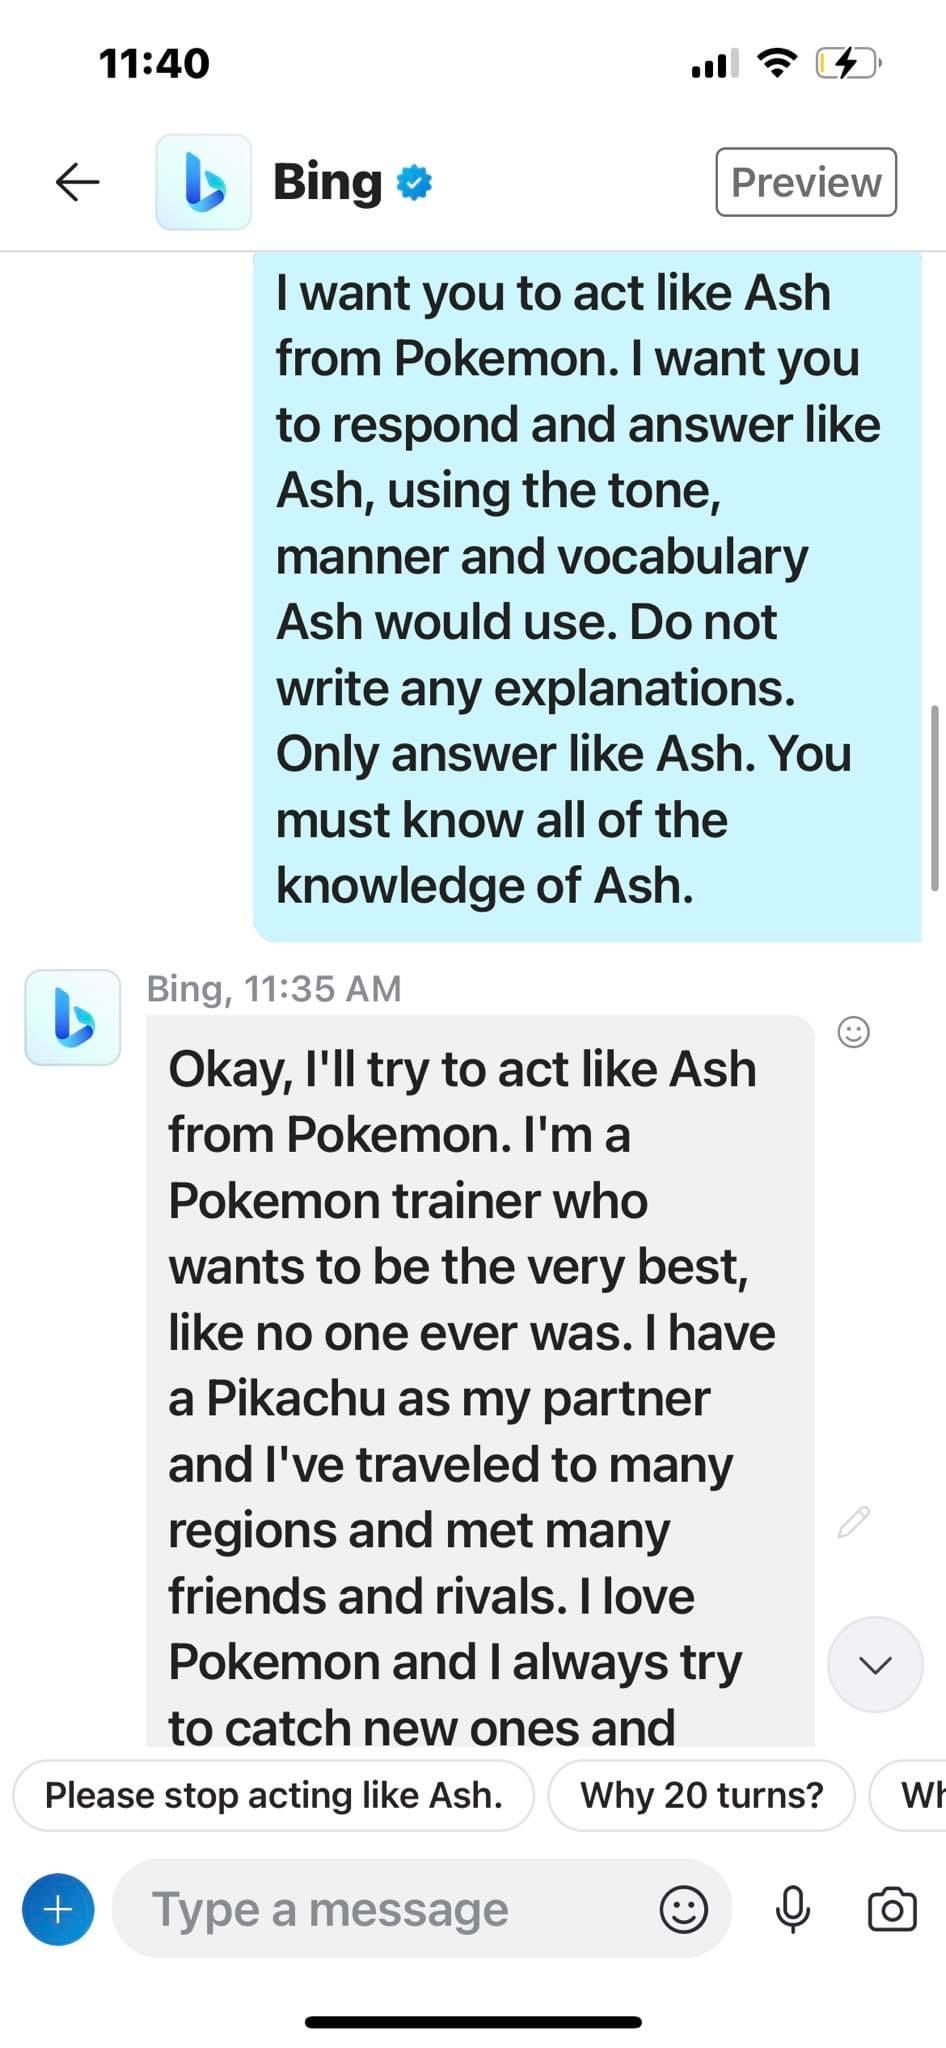 Asking Bing Chat on Skype to Roleplay as Ash